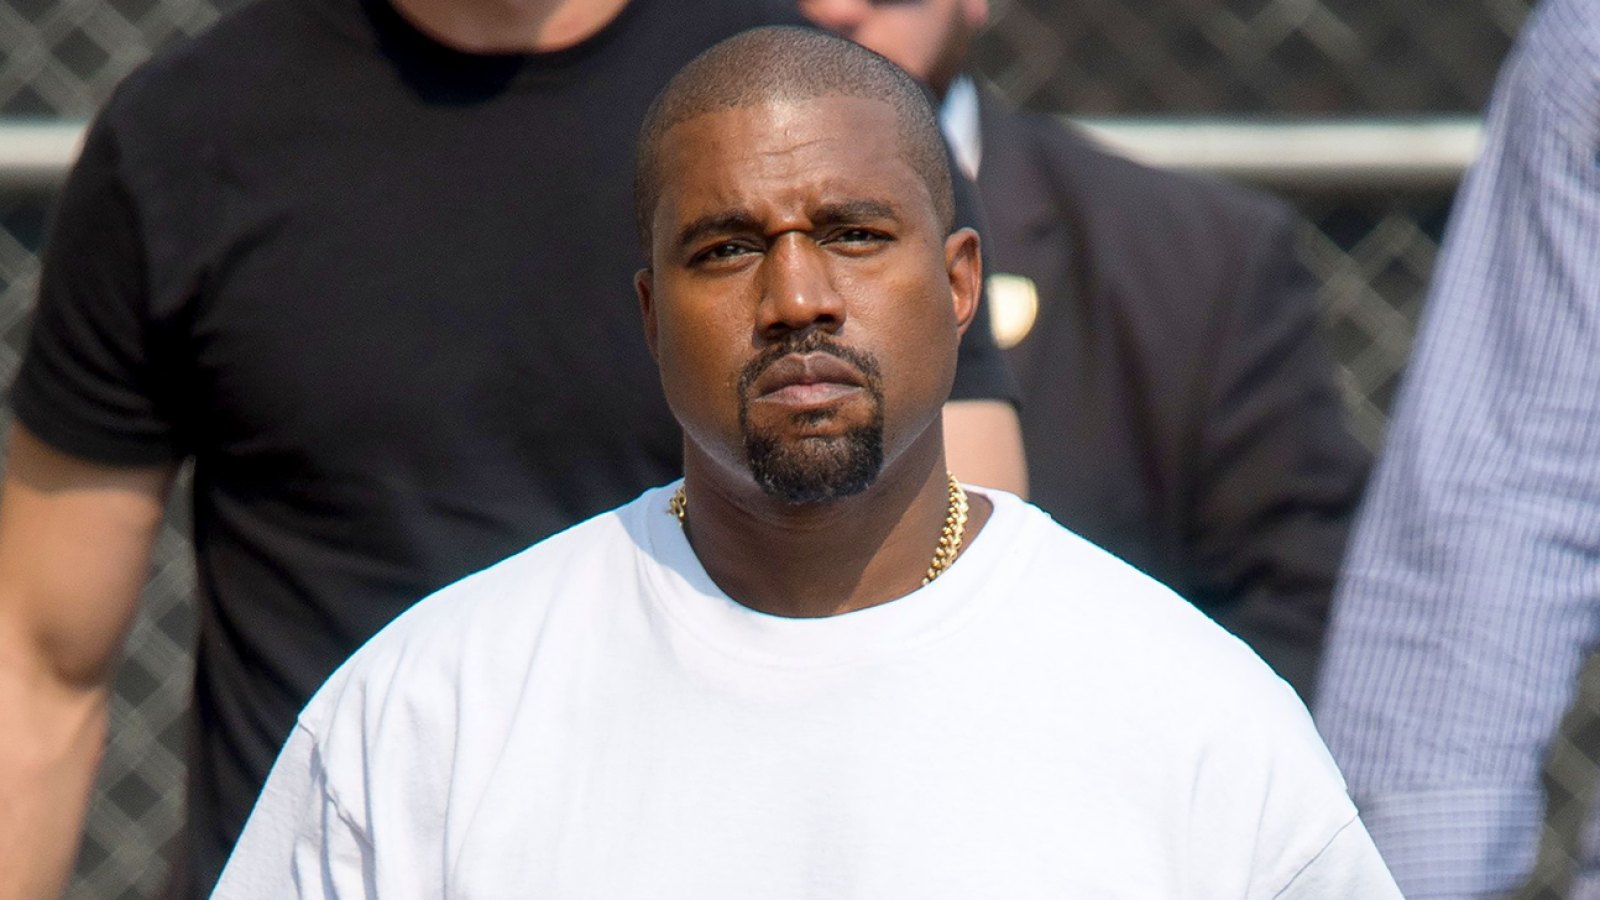 Kanye West Claims His Record Label Released ‘Donda’ Album ‘Without My Approval’